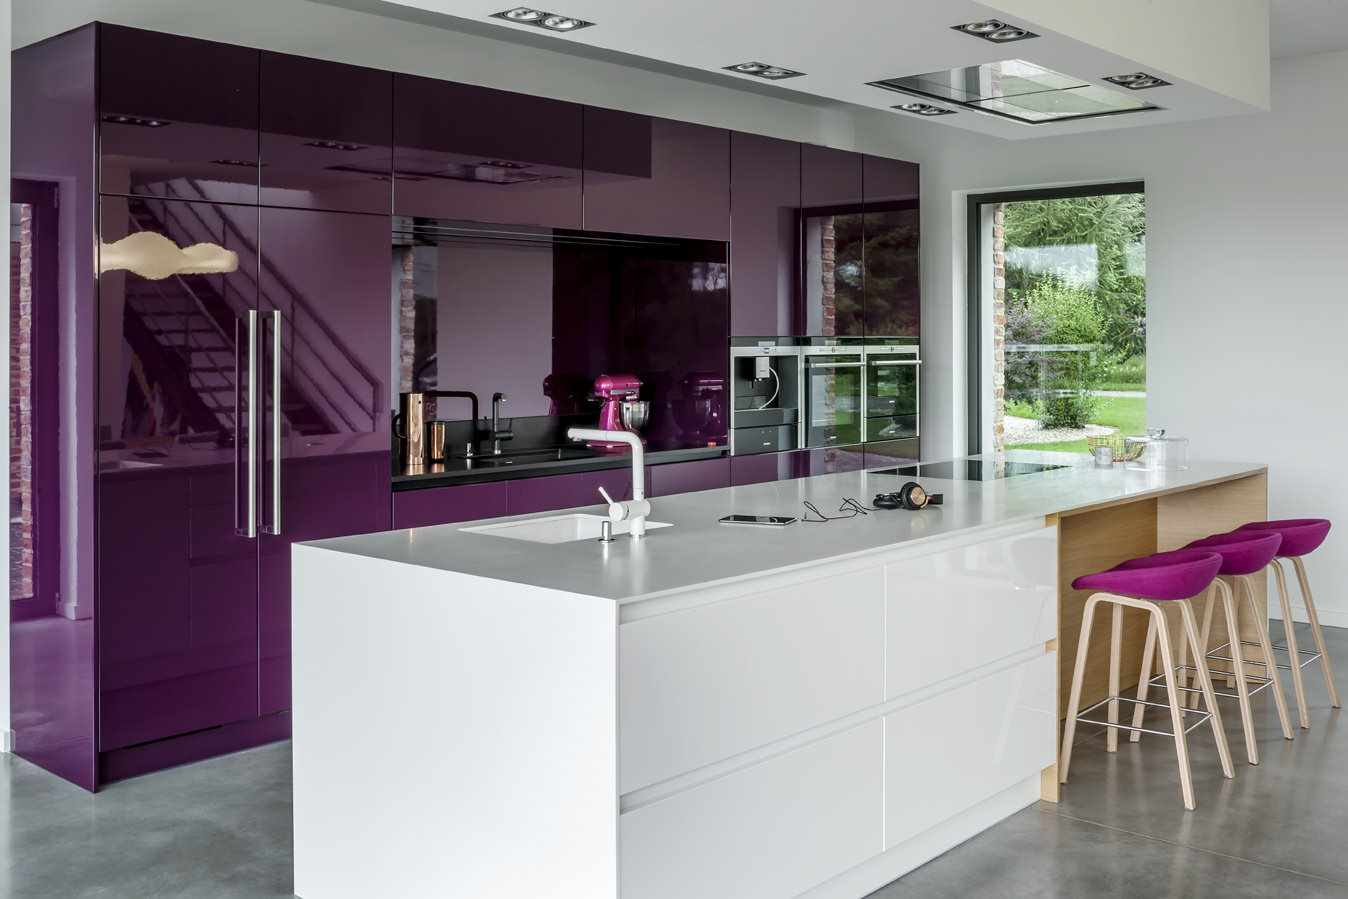 an example of an unusual kitchen design